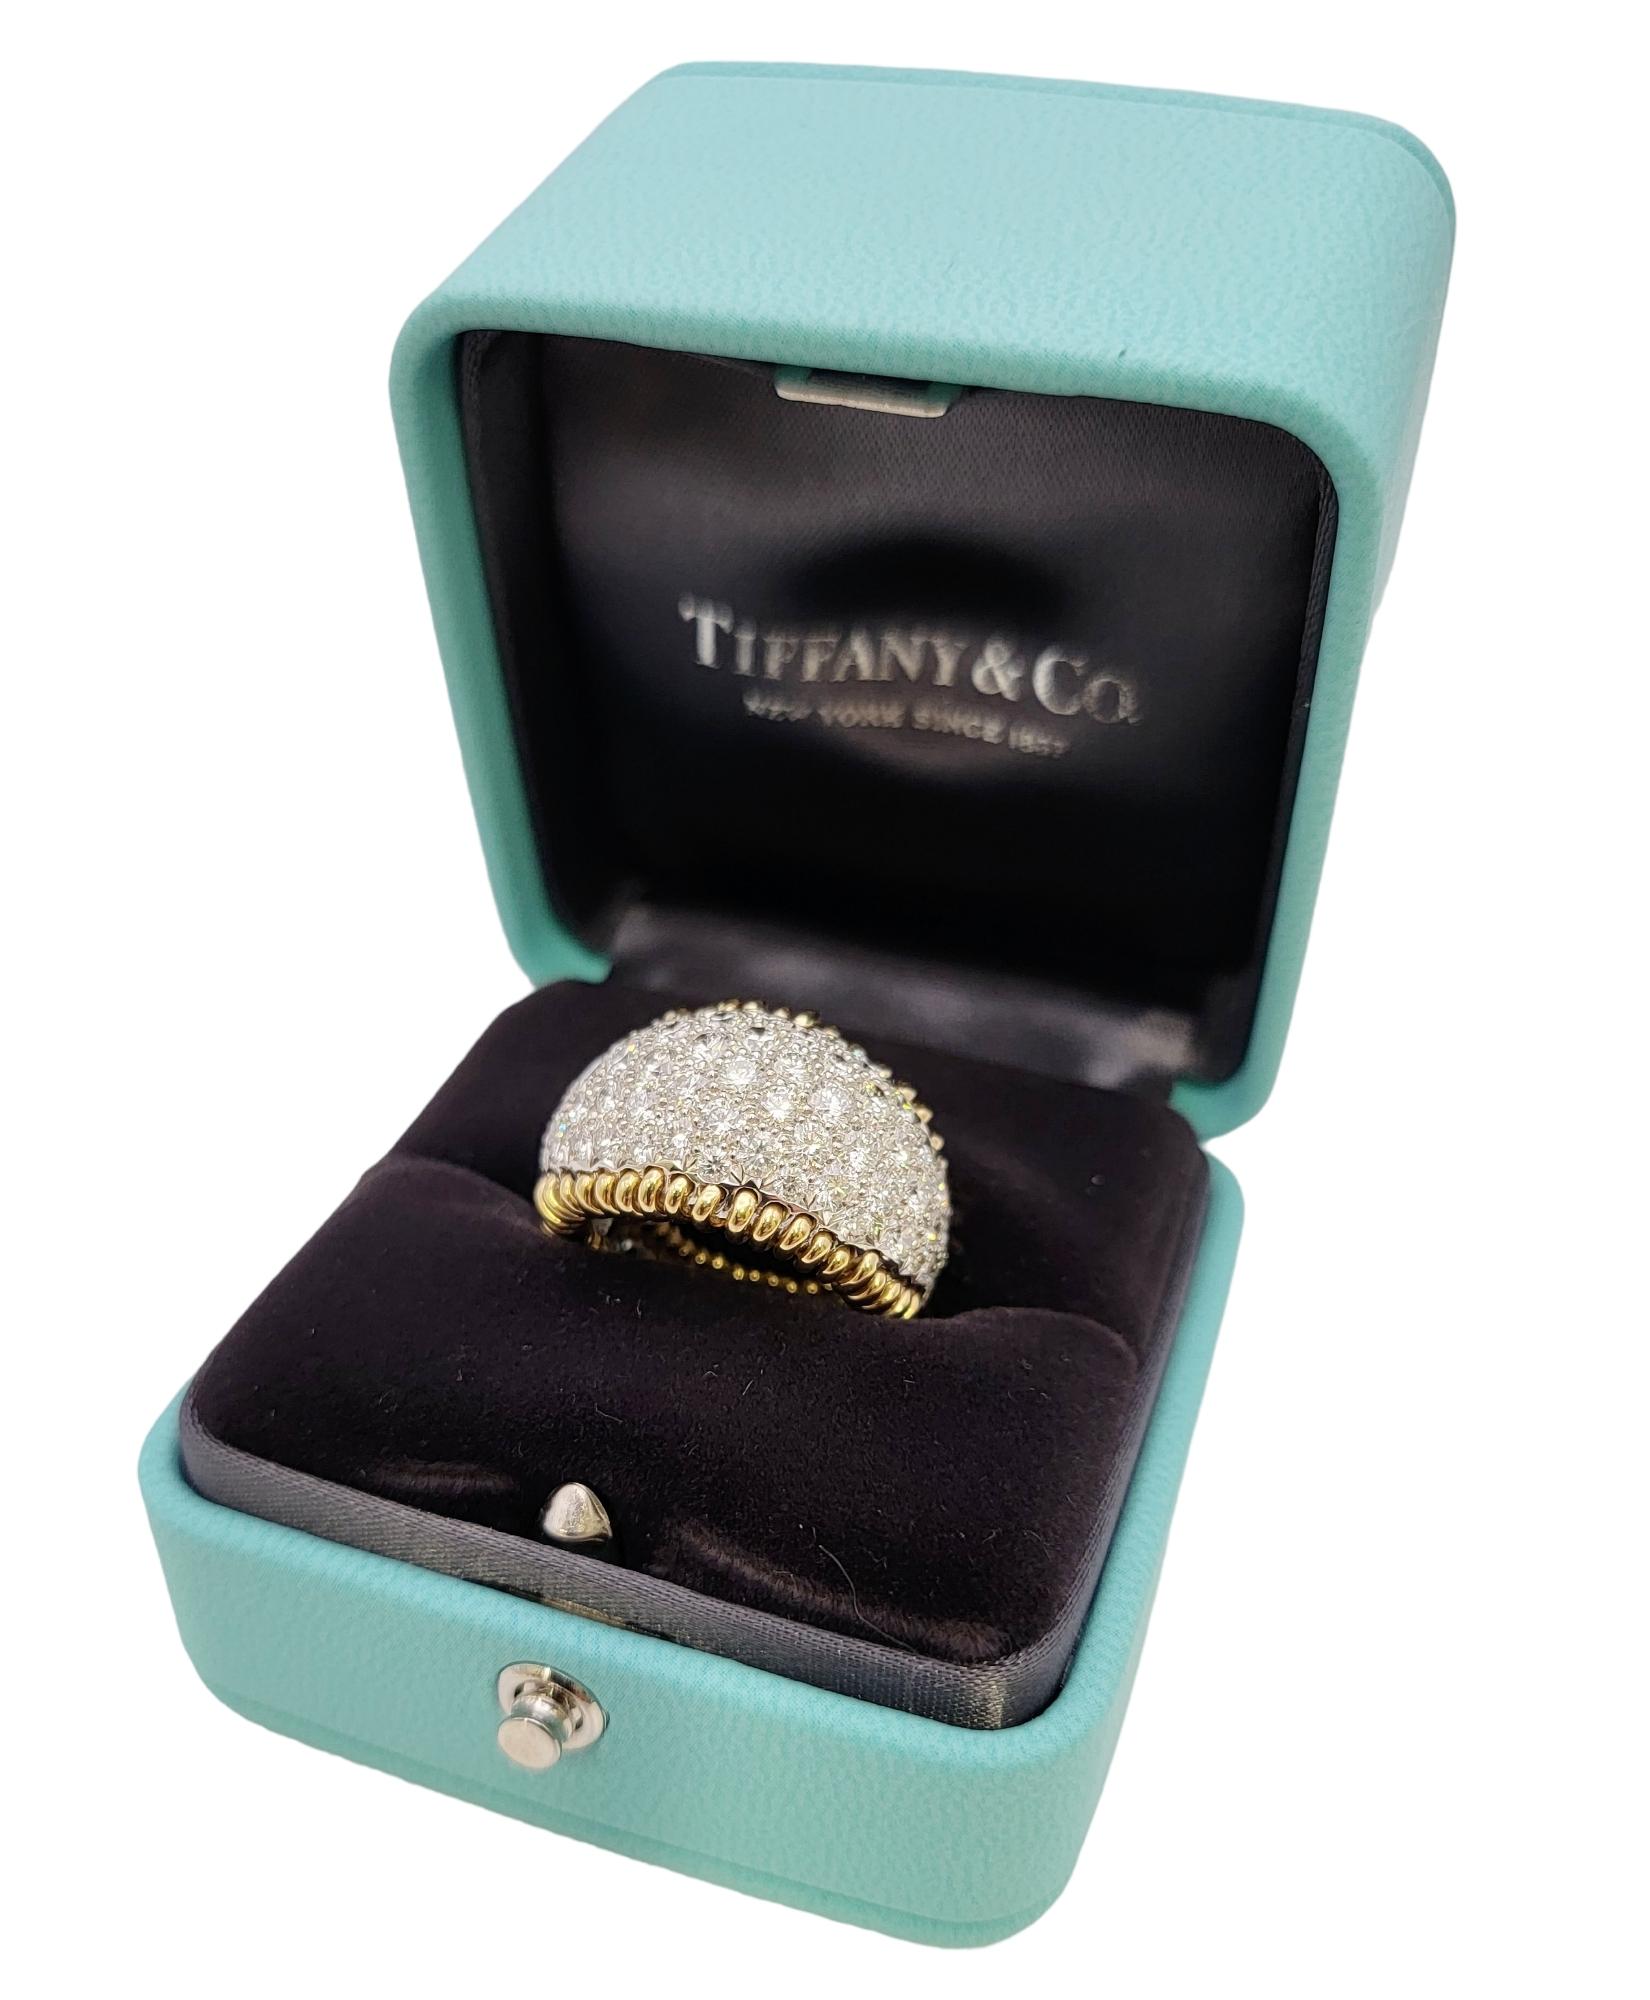 Tiffany & Co. Schlumberger 'Stitches' Diamond Cocktail Ring 3.91 Carats Total 7